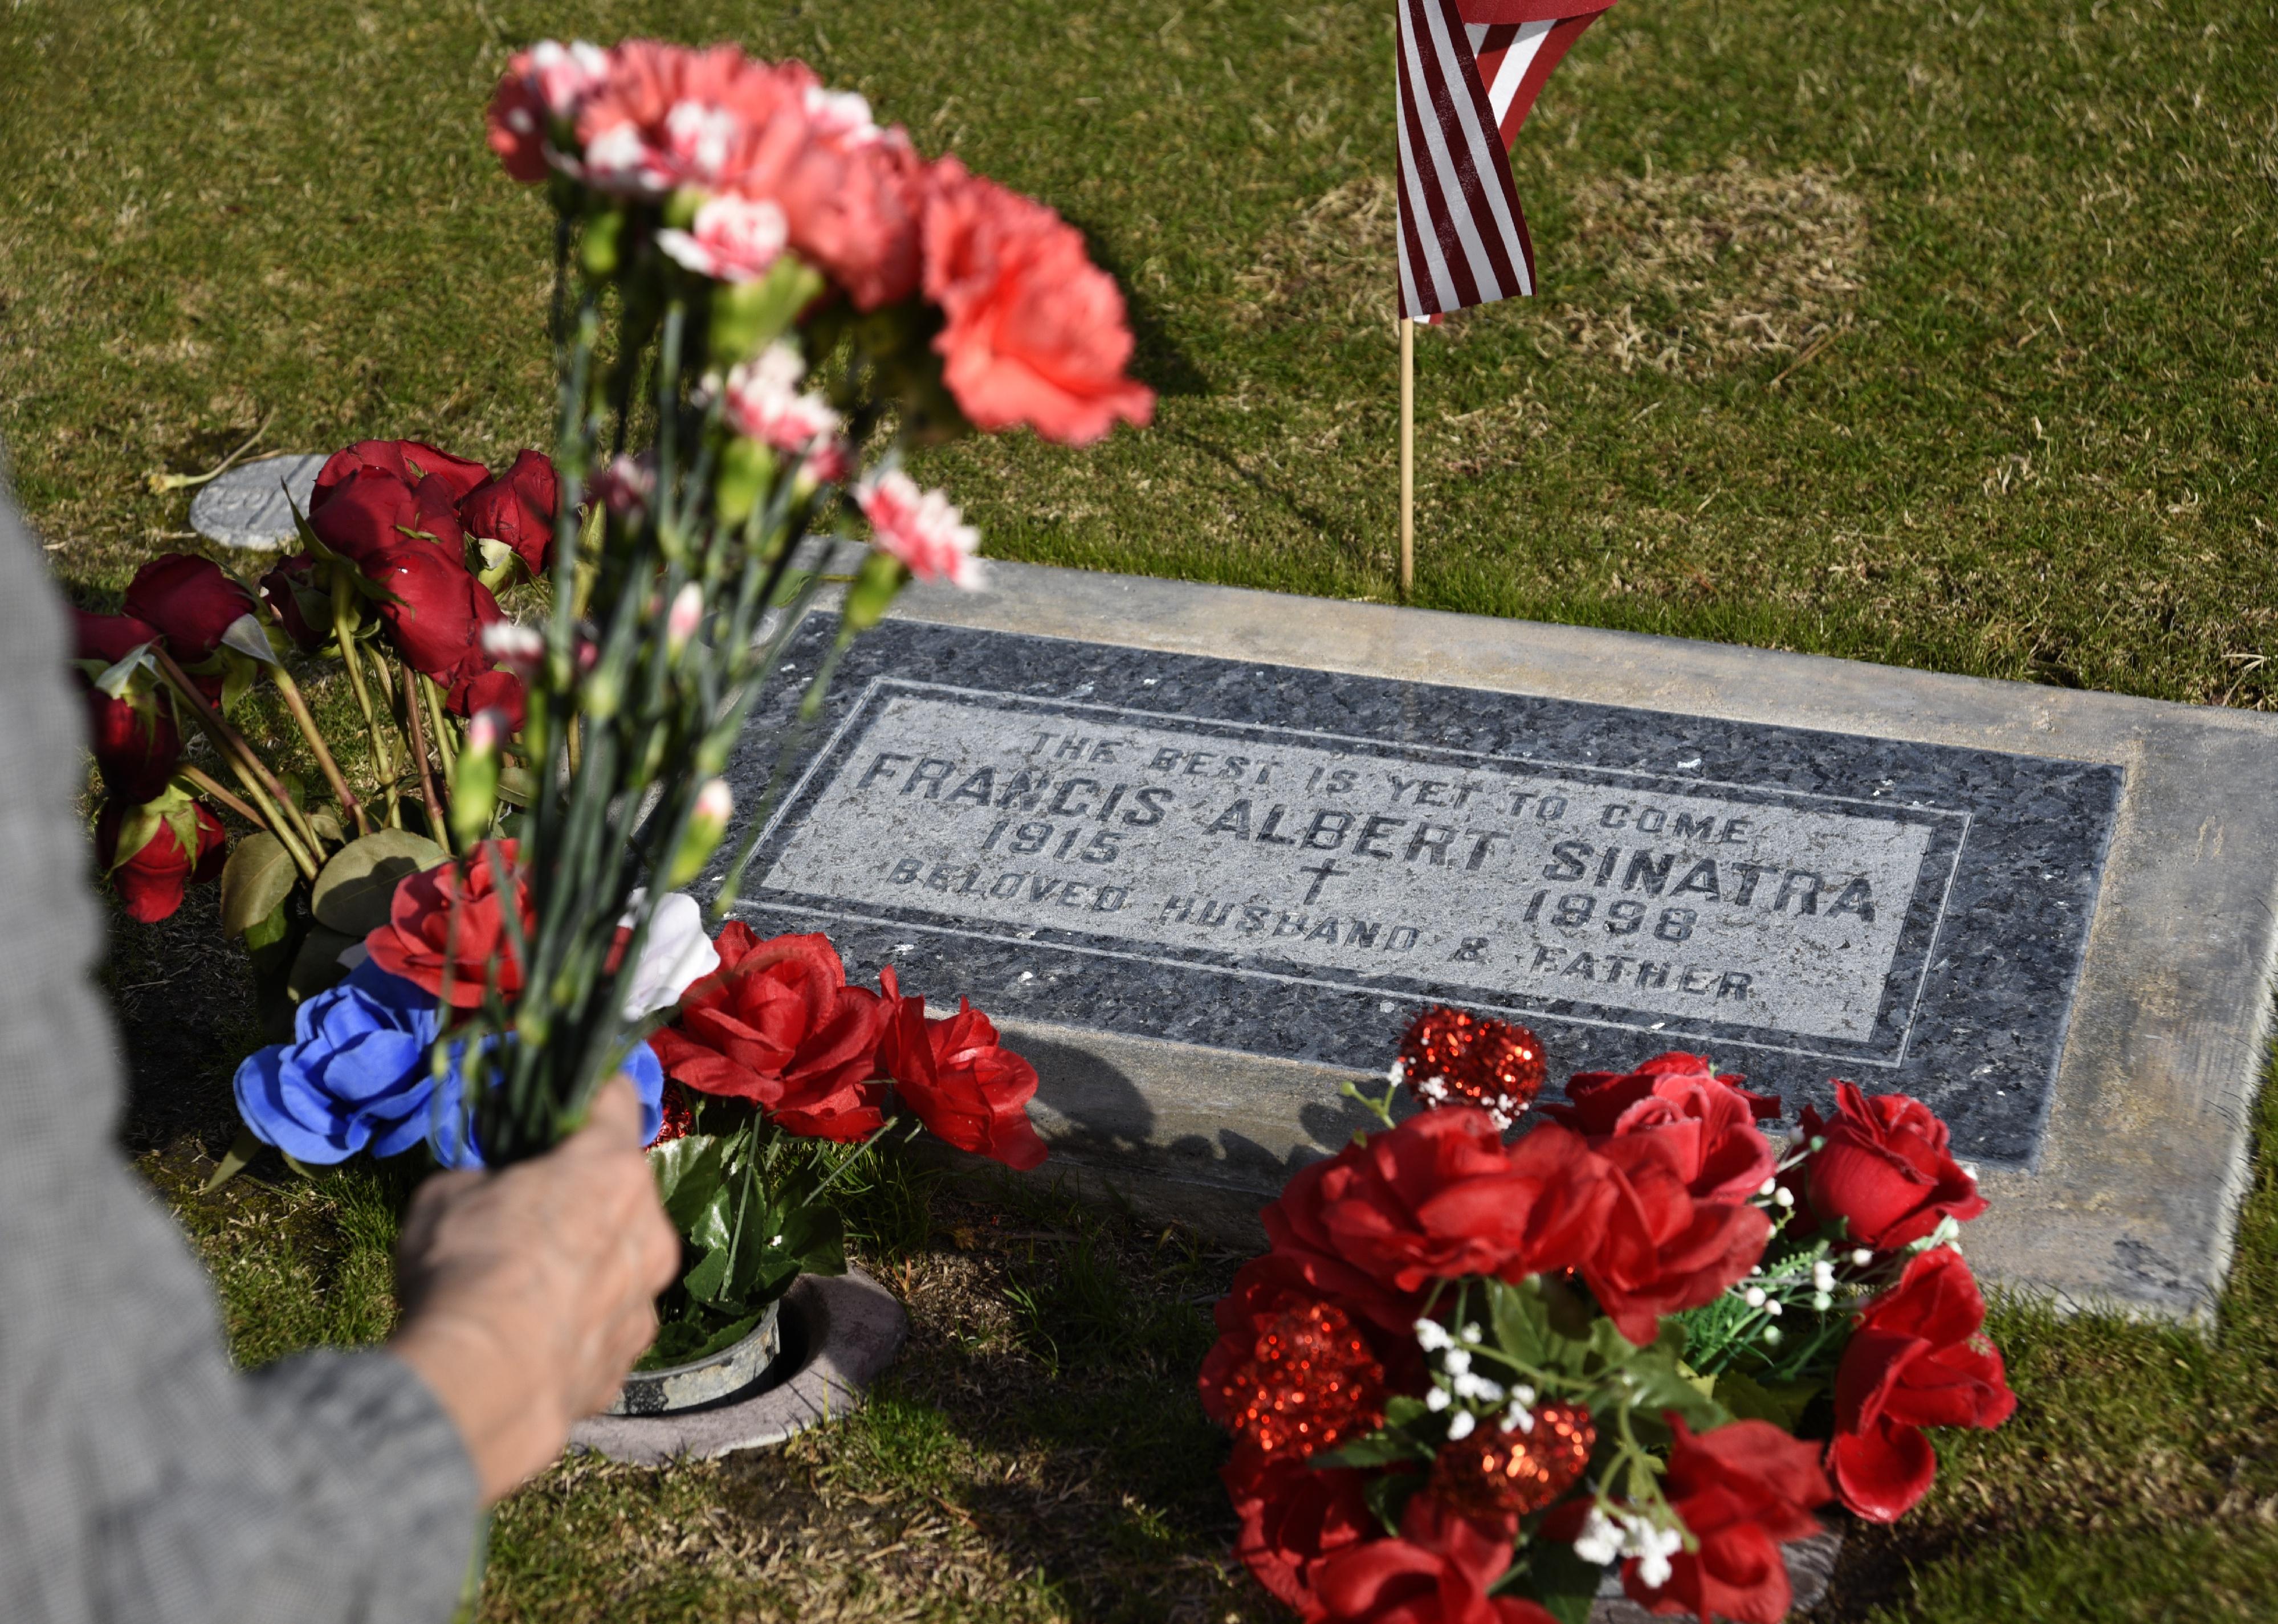 A woman places flowers on the grave of singer Frank Sinatra at Desert Memorial Park in Cathedral City.